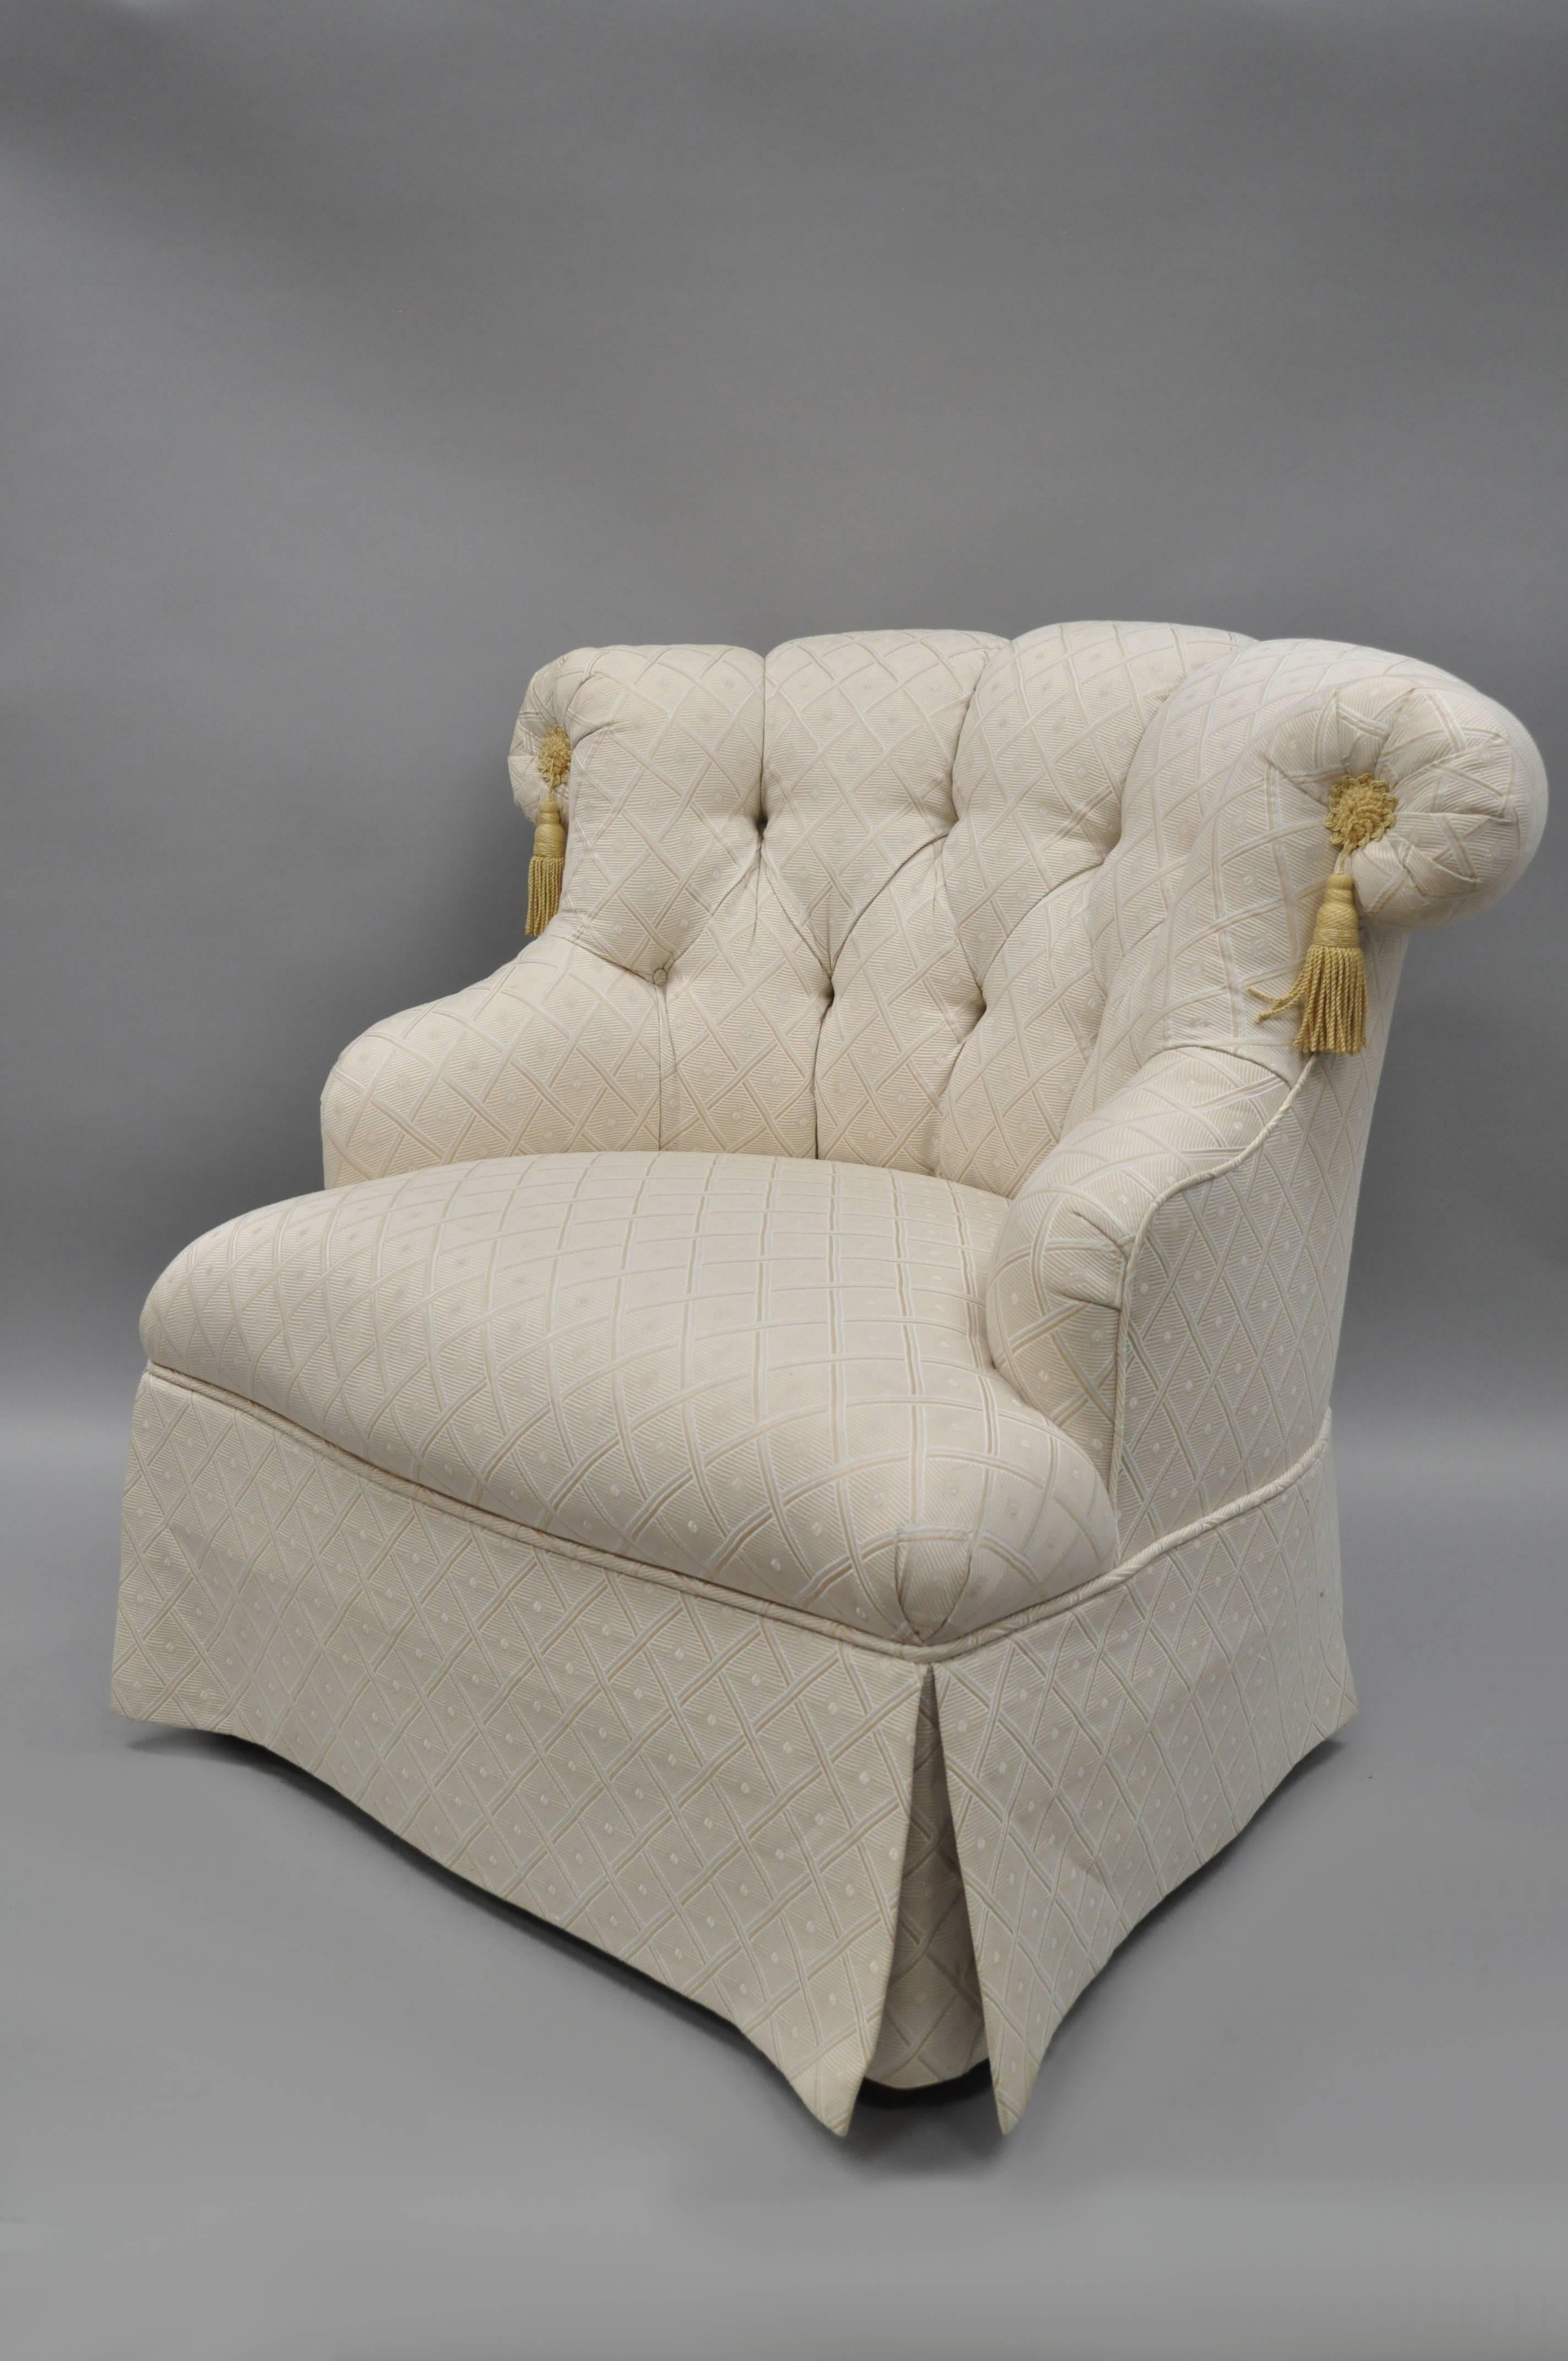 Pair of upholstered and button tufted slipper lounge chairs by Tomlinson Erwin Lambeth in the Napoleon III style. Chairs feature solid wood frames, rolled backs, button tufted upholstery, gold tassels, skirted base, and original label.